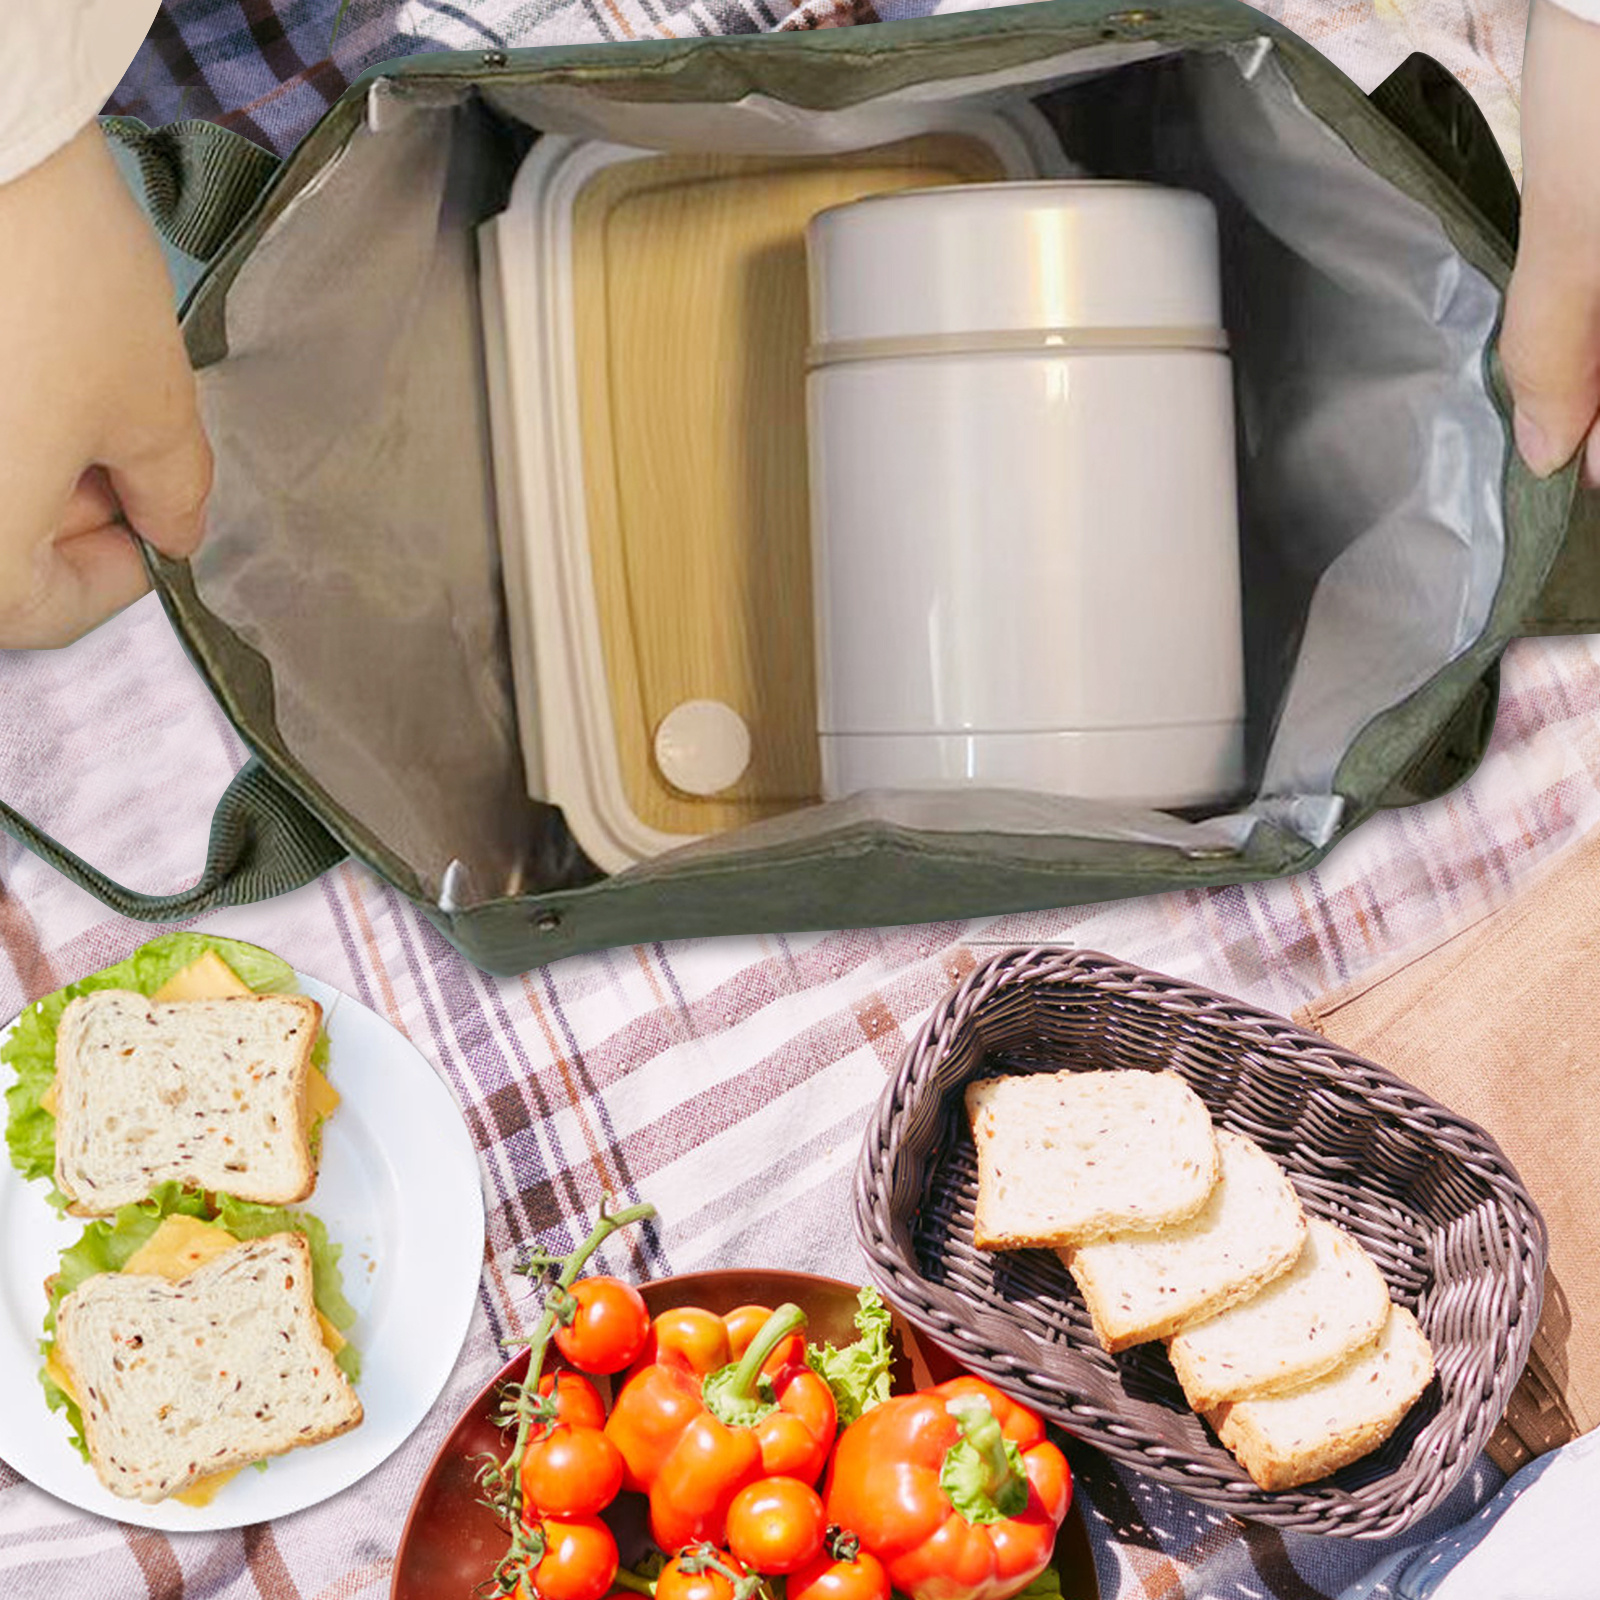 1pc Rectangle Lunch Bag With Handle, Reusable Lunch Box For Women